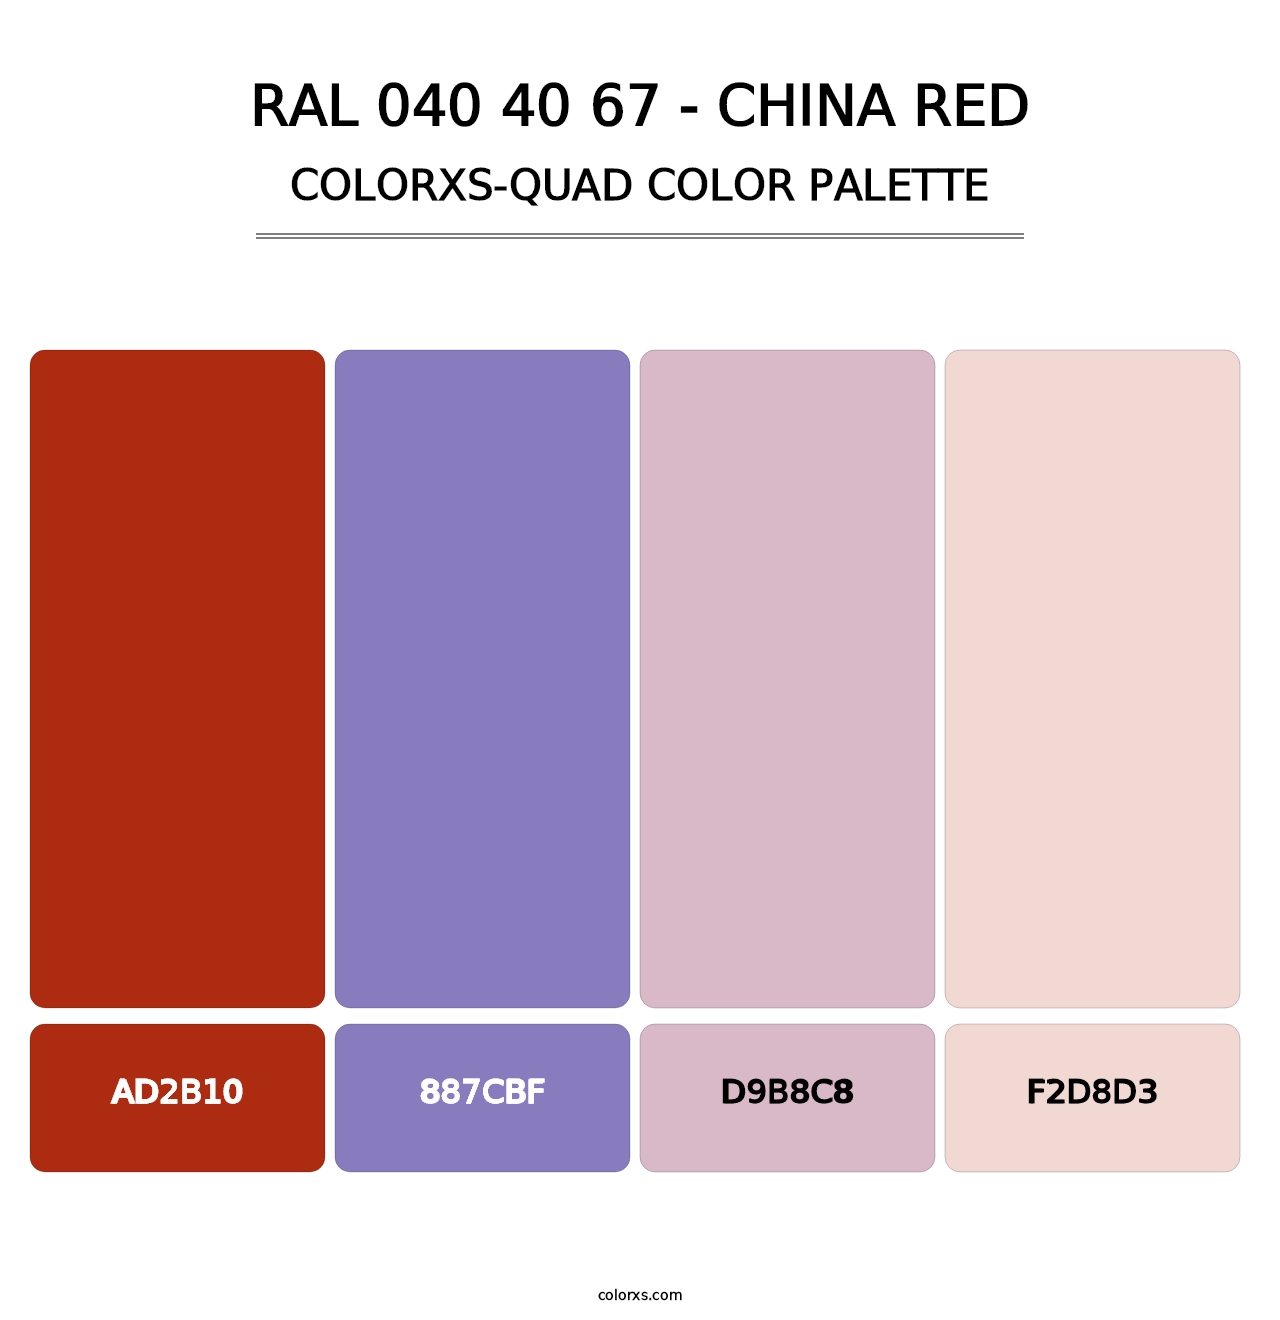 RAL 040 40 67 - China Red - Colorxs Quad Palette